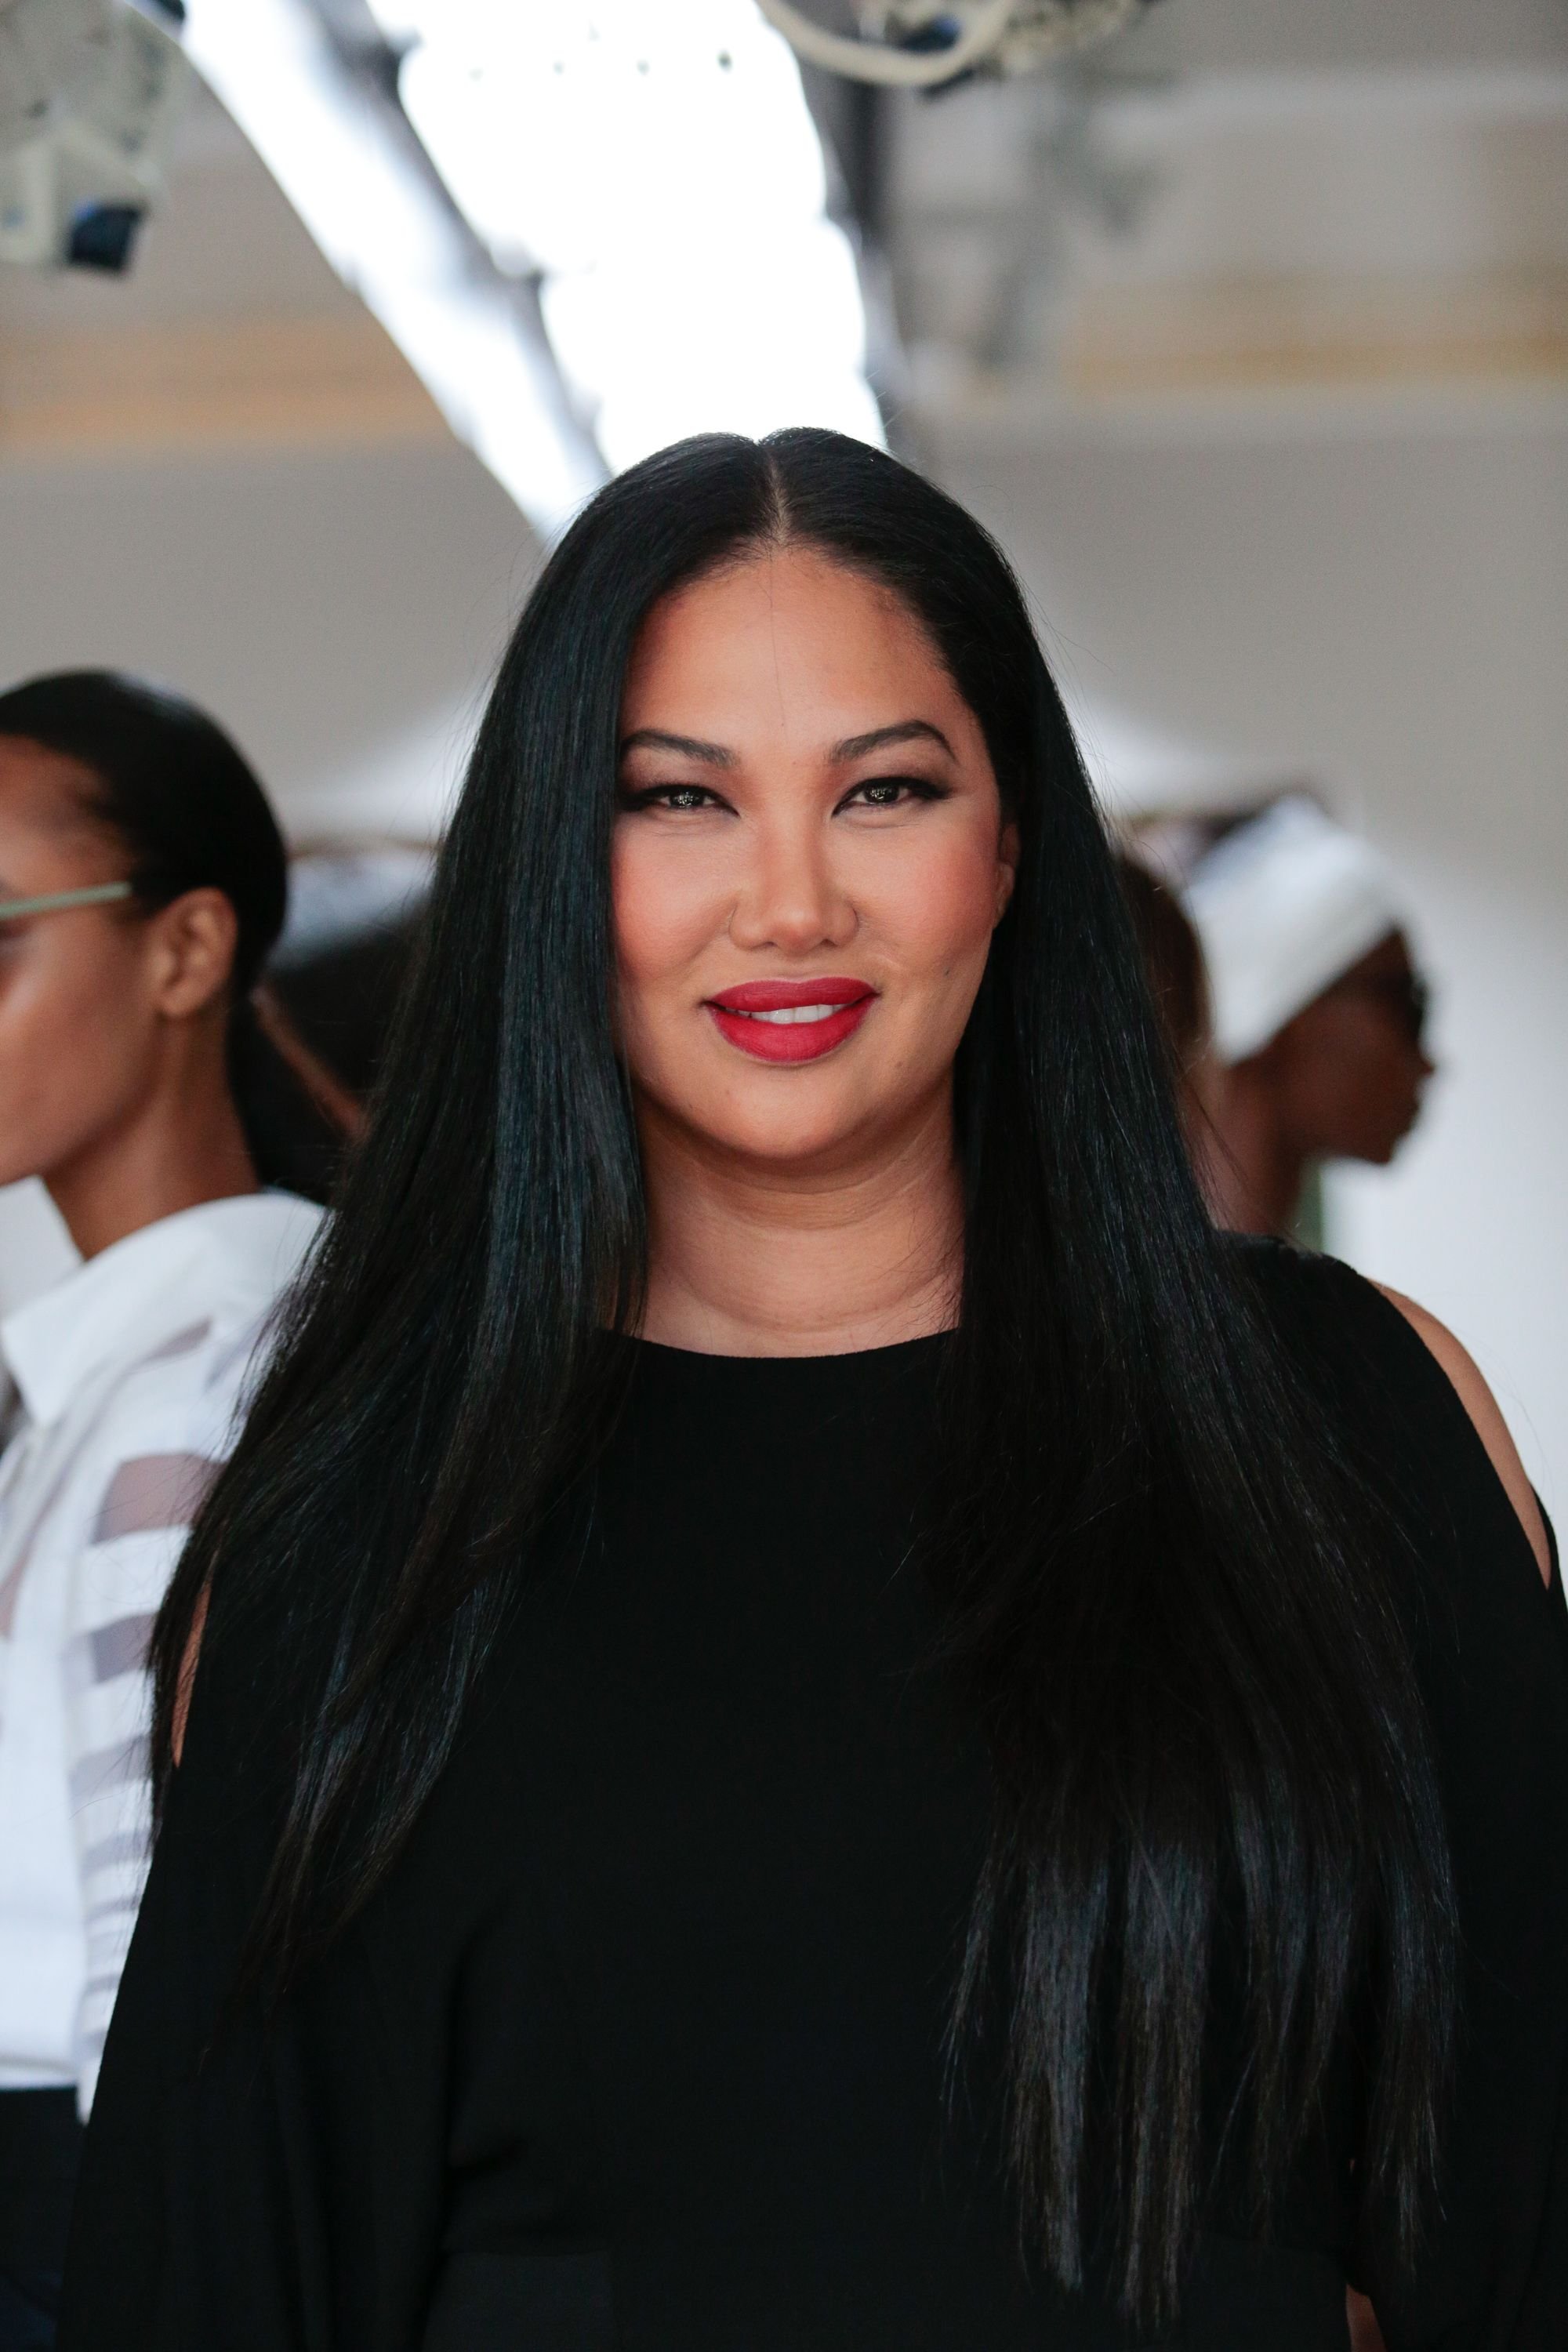 Kimora Lee Simmons during New York Fashion Week at The Gallery, Skylight at Clarkson Sq on September 14, 2016. | Photo: Getty Image